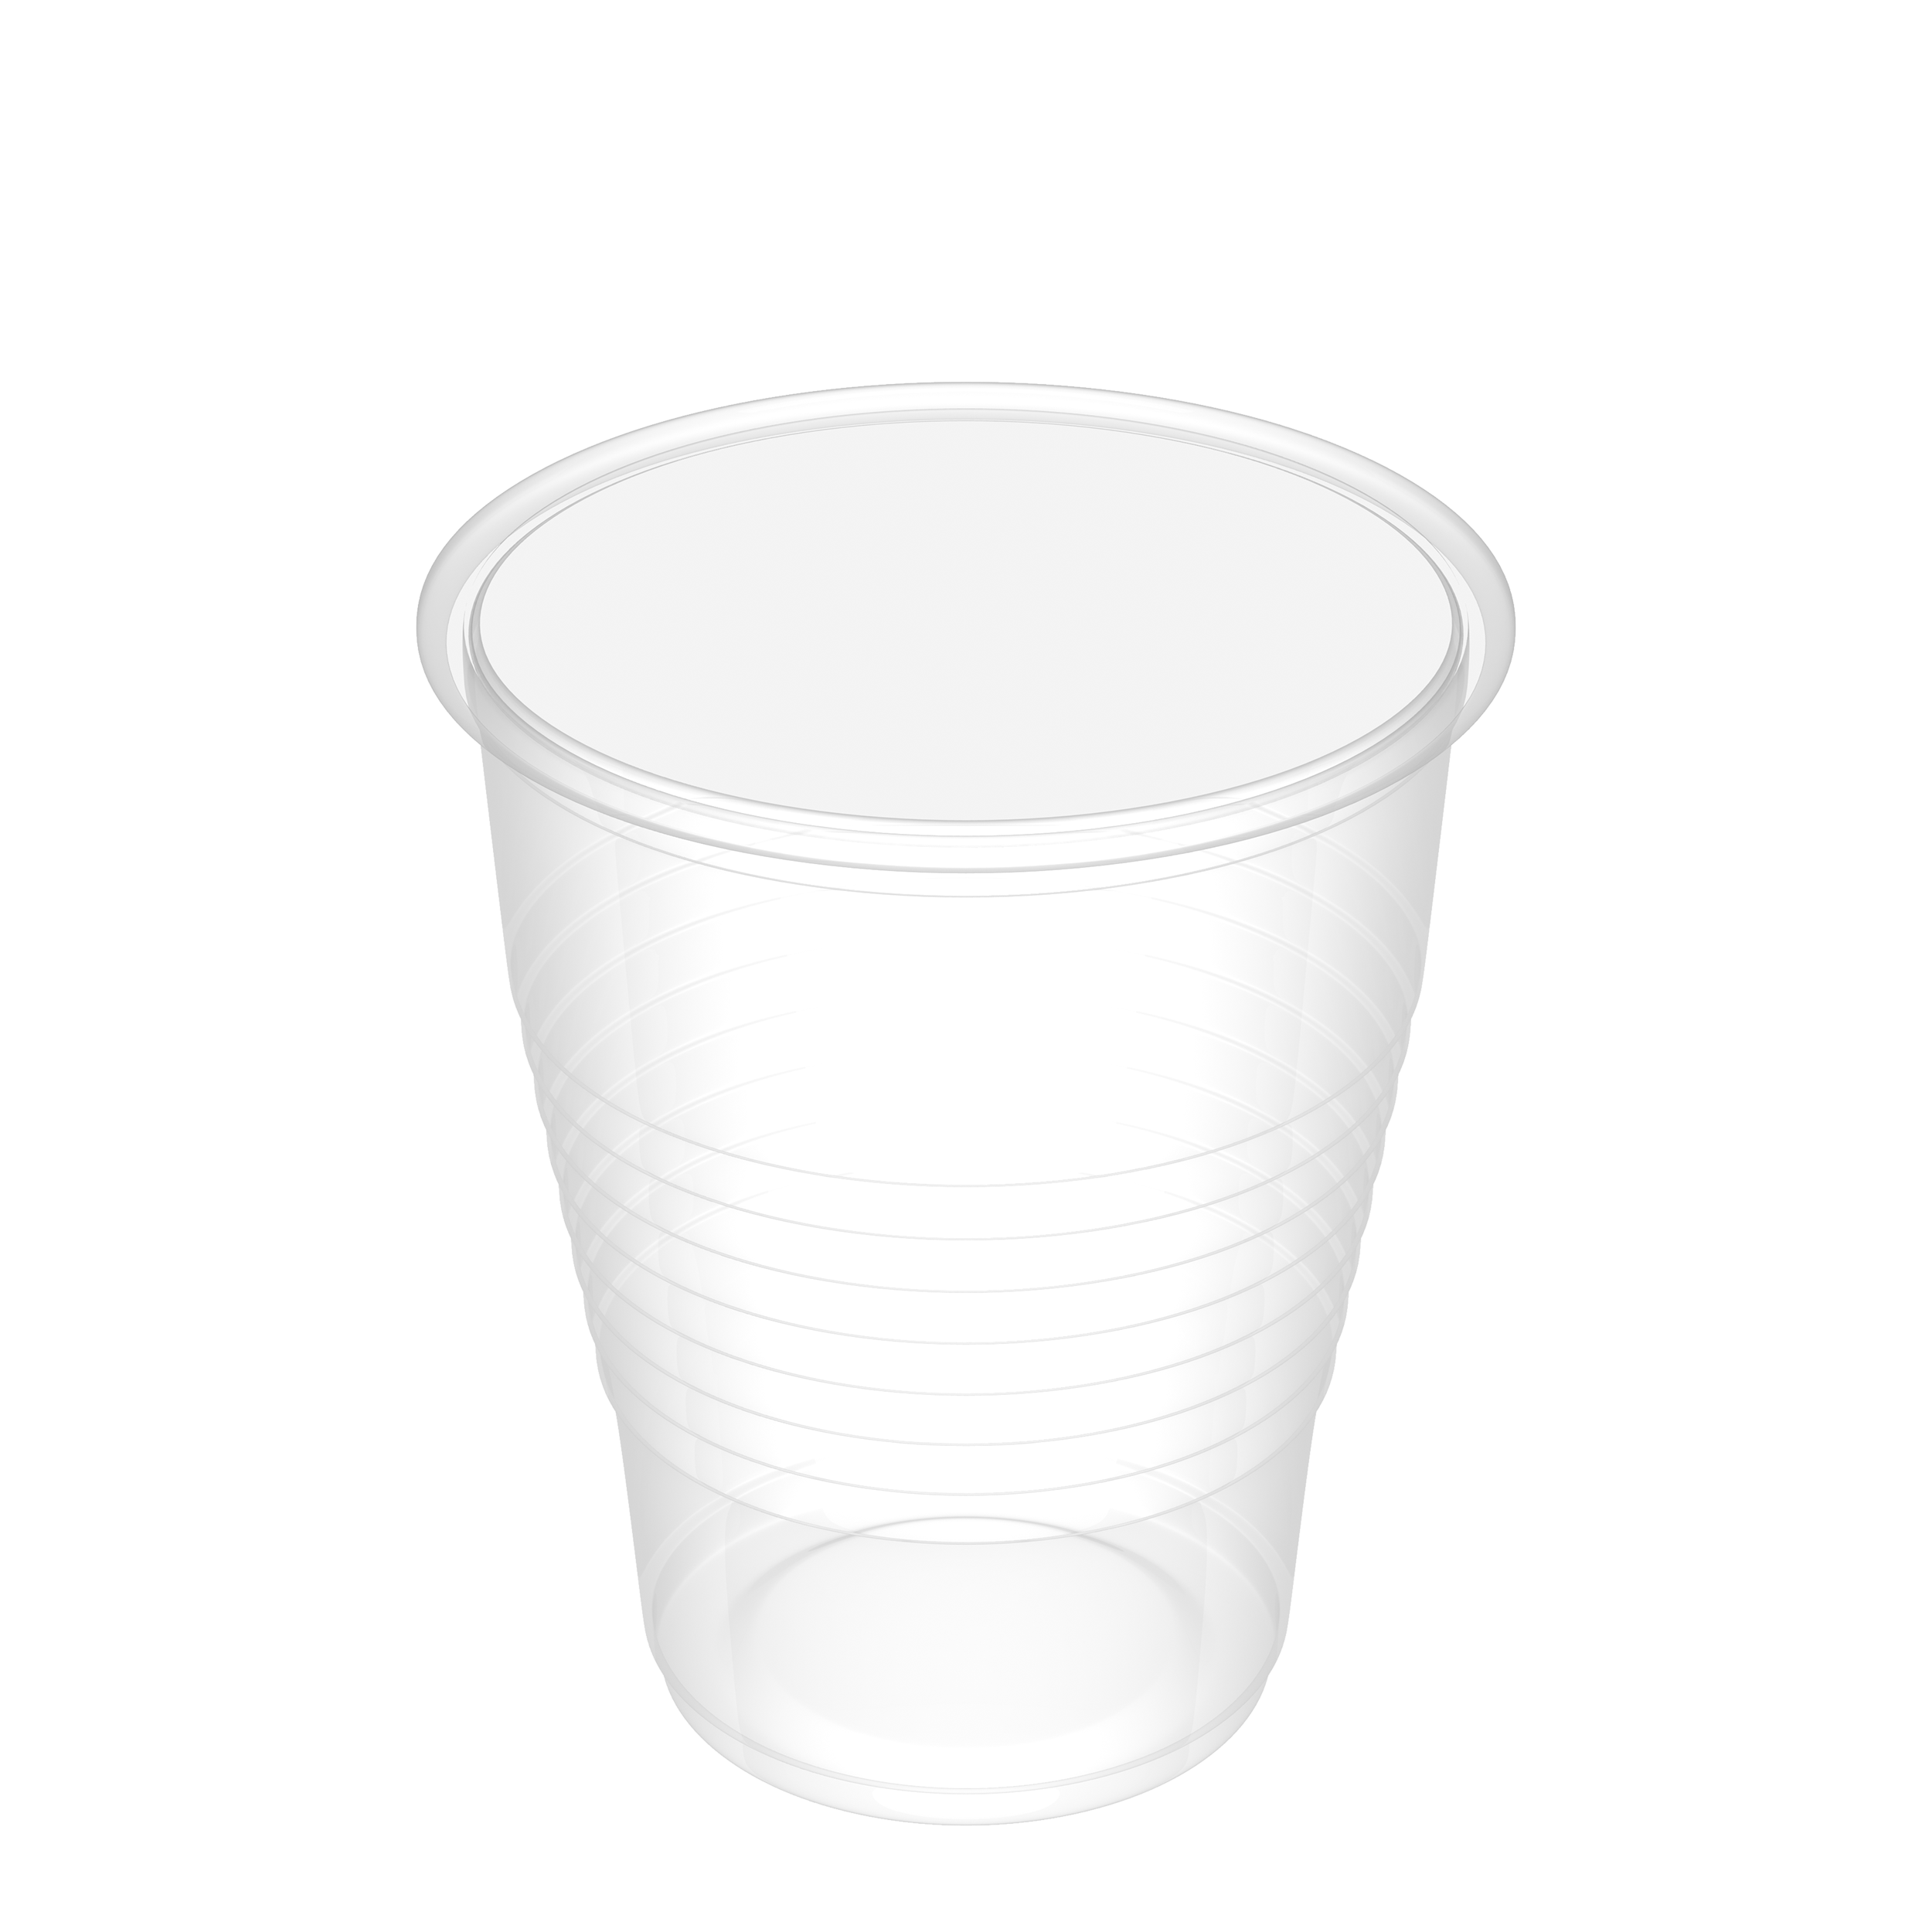 Drinking Cups - 5 oz.